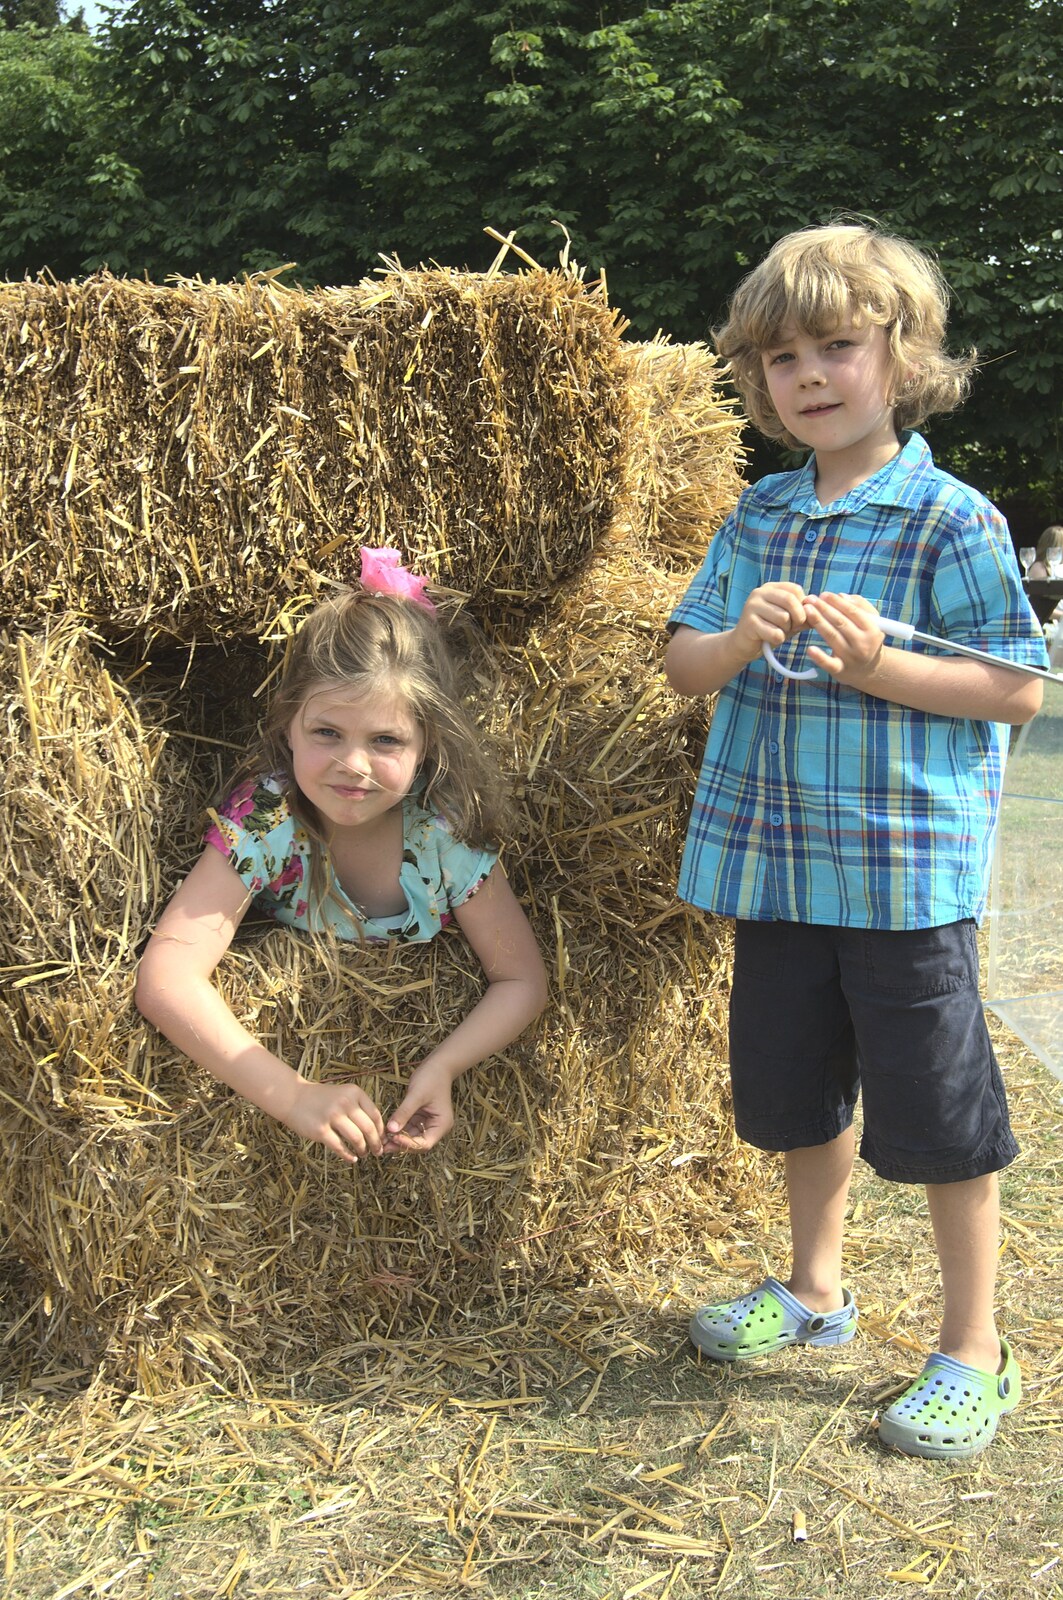 Sydney and Rowan in straw from Nosher and Isobel's Wedding, Brome, Suffolk - 3rd July 2010